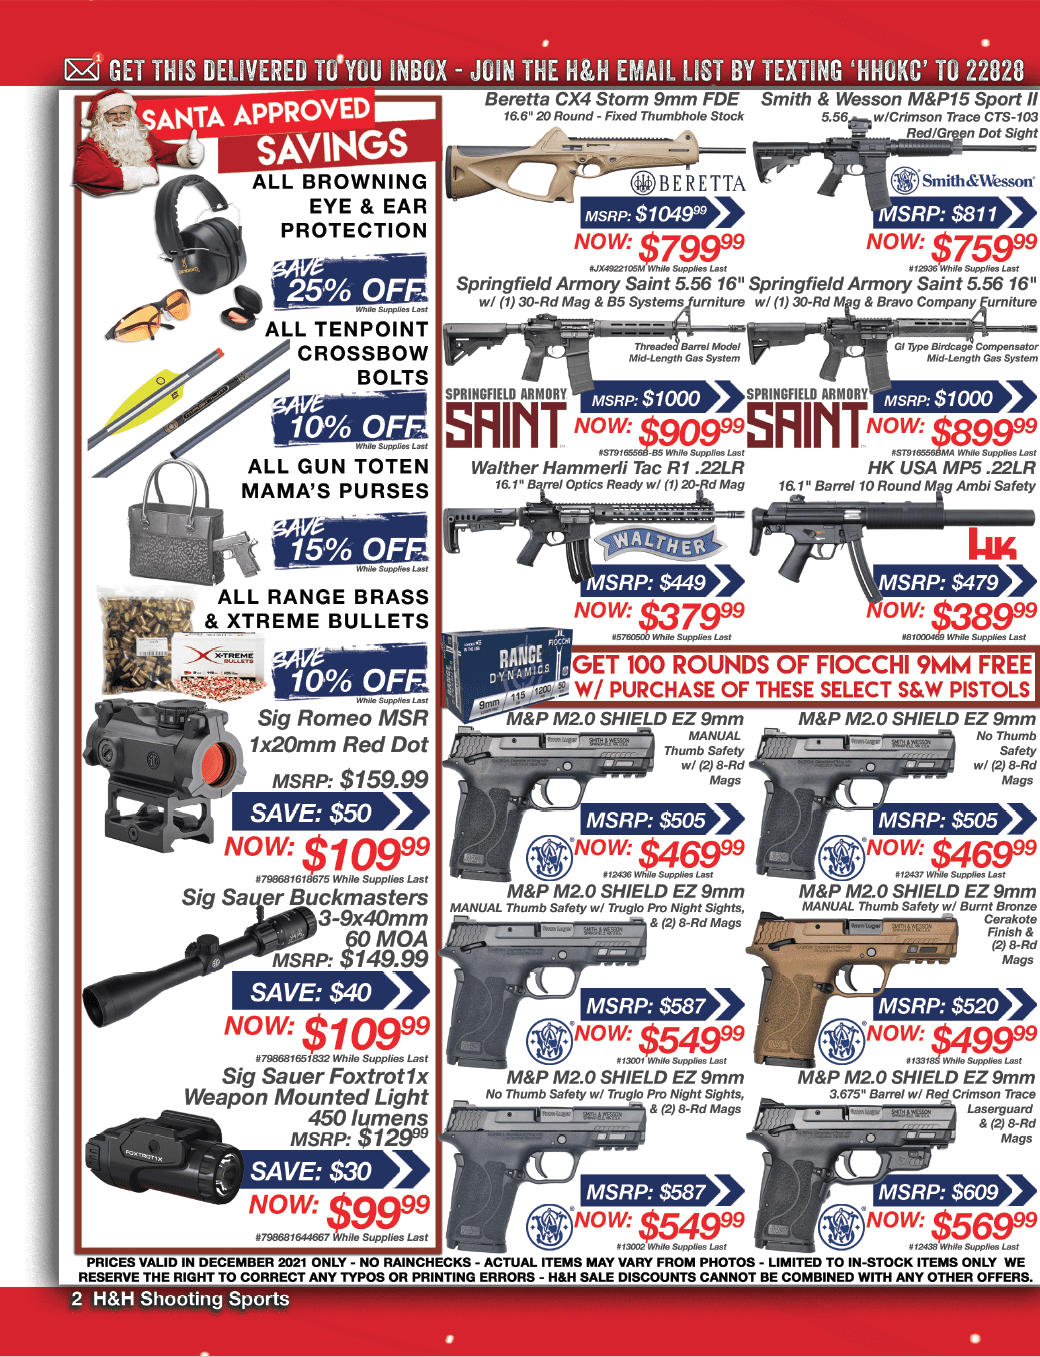 May Sales Event at H&H Shooting Sports - Gun Range in OKC